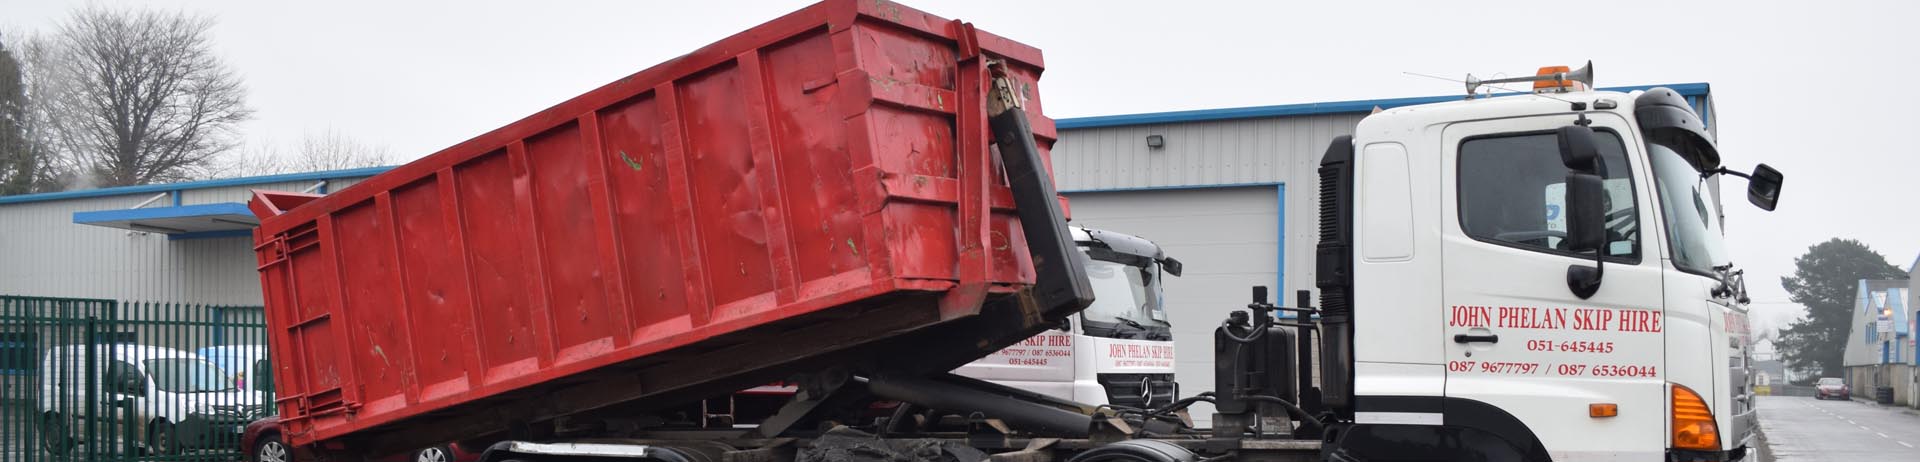 commercial skip hire image